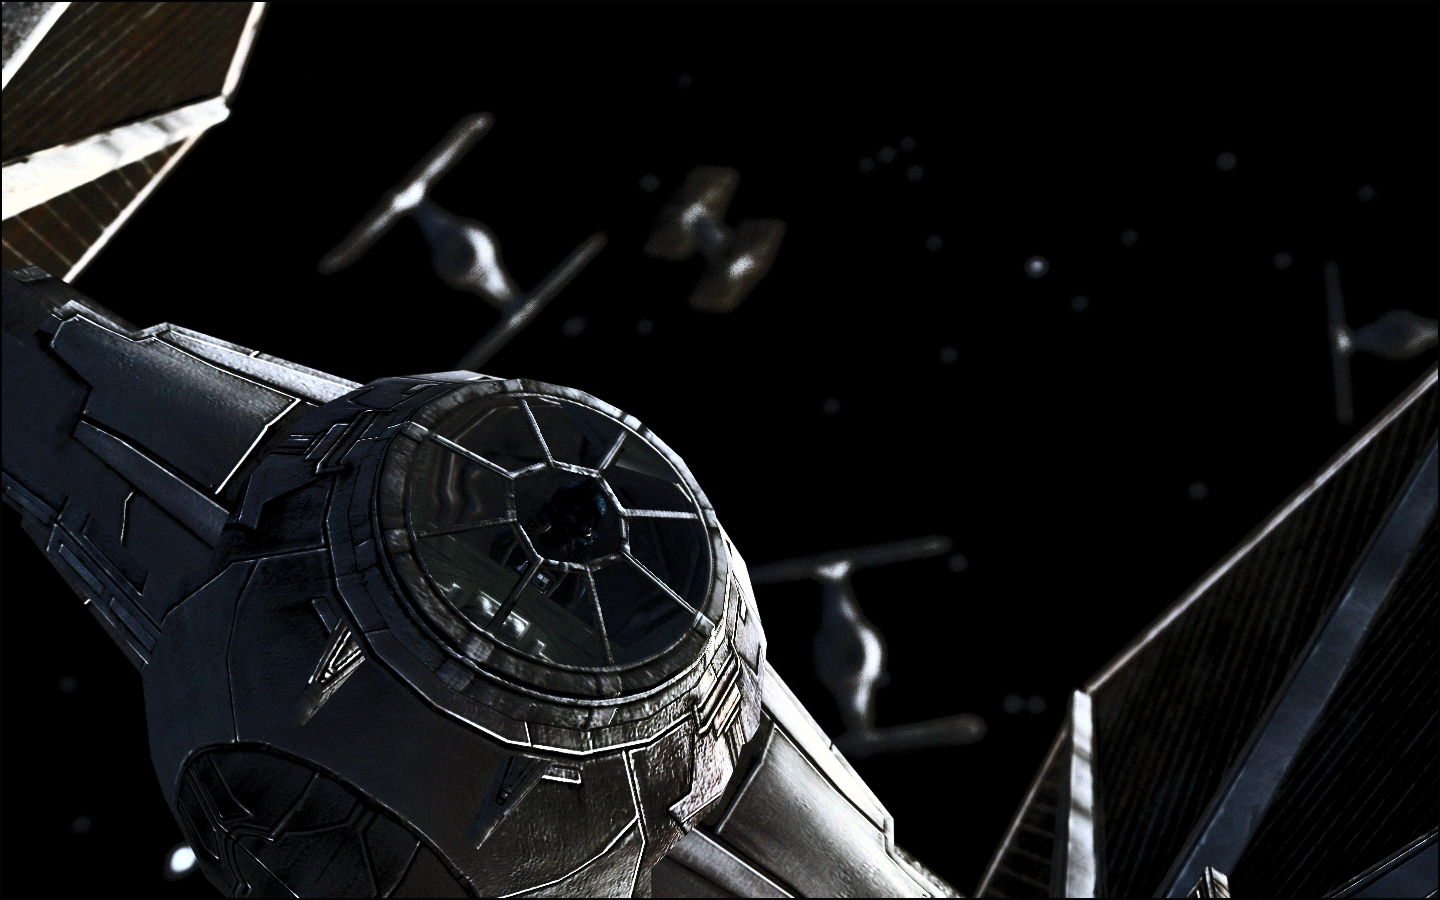 Hope You Like This Tie Fighter HD Wallpaper As Much